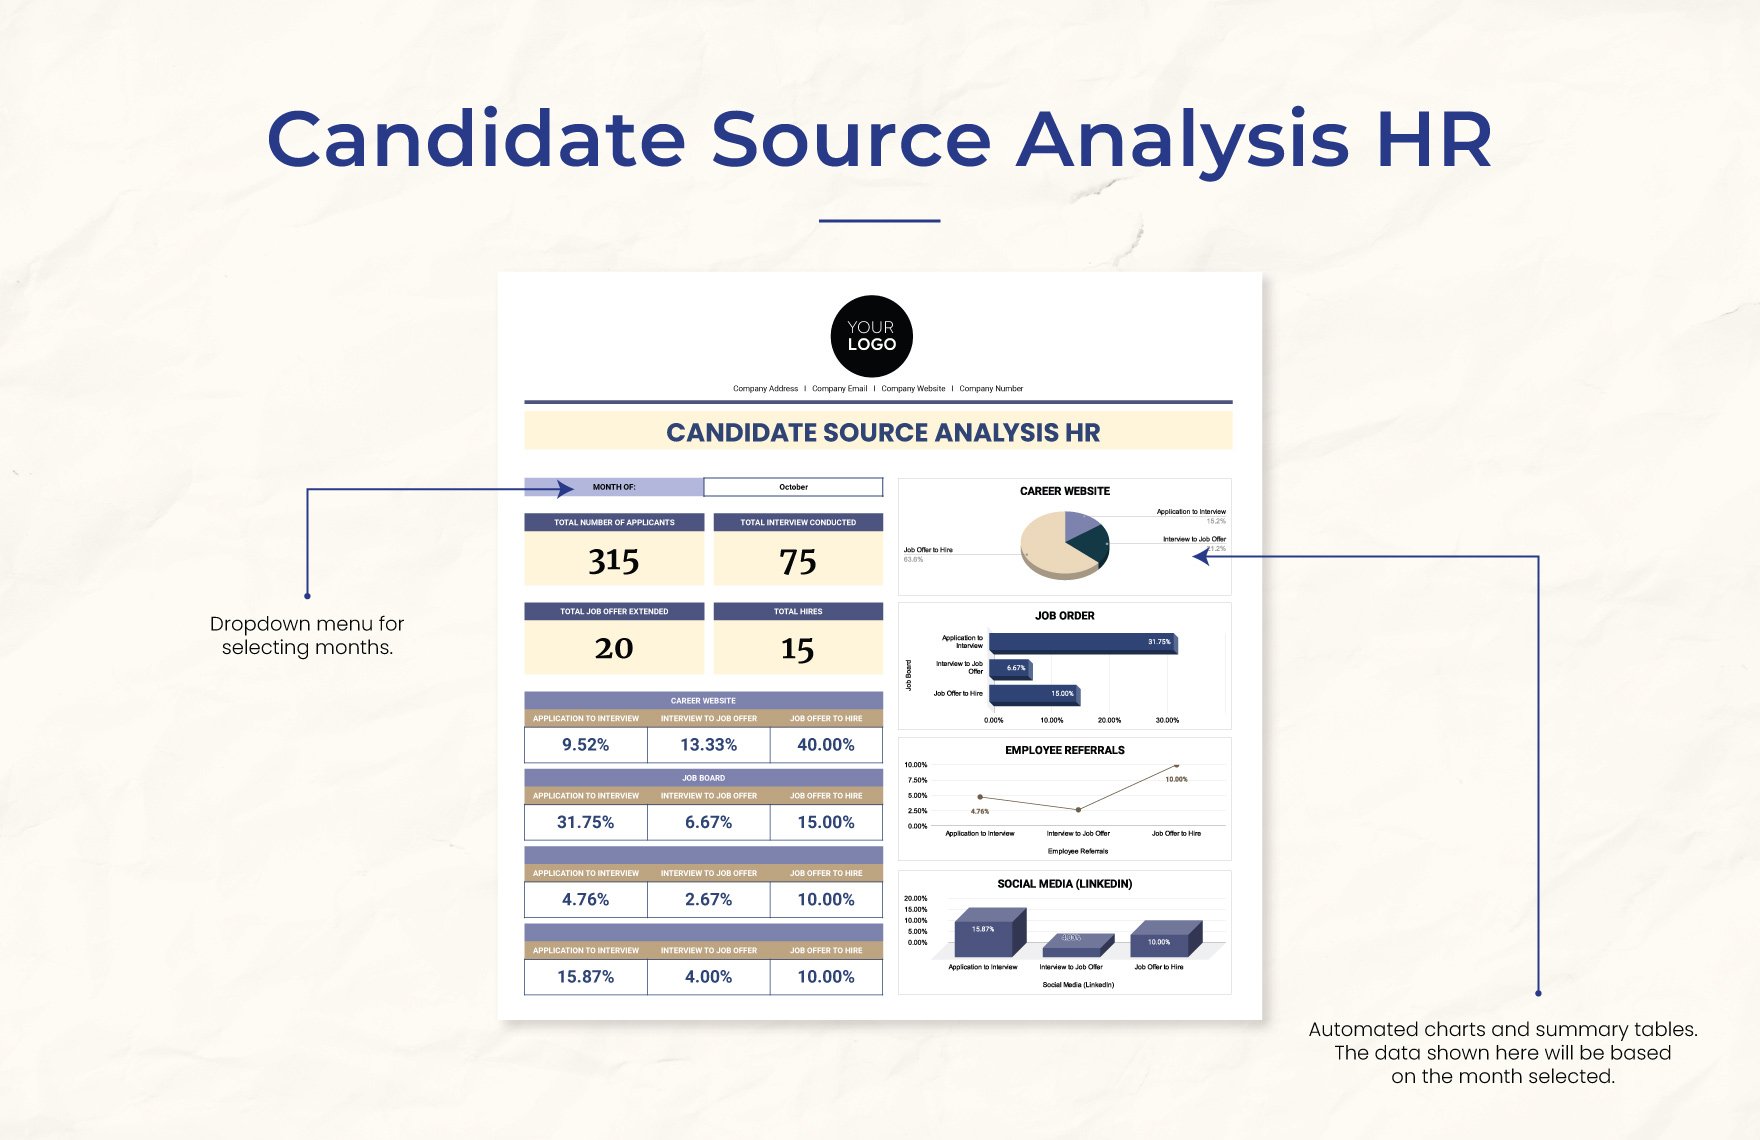 Candidate Source Analysis HR Template